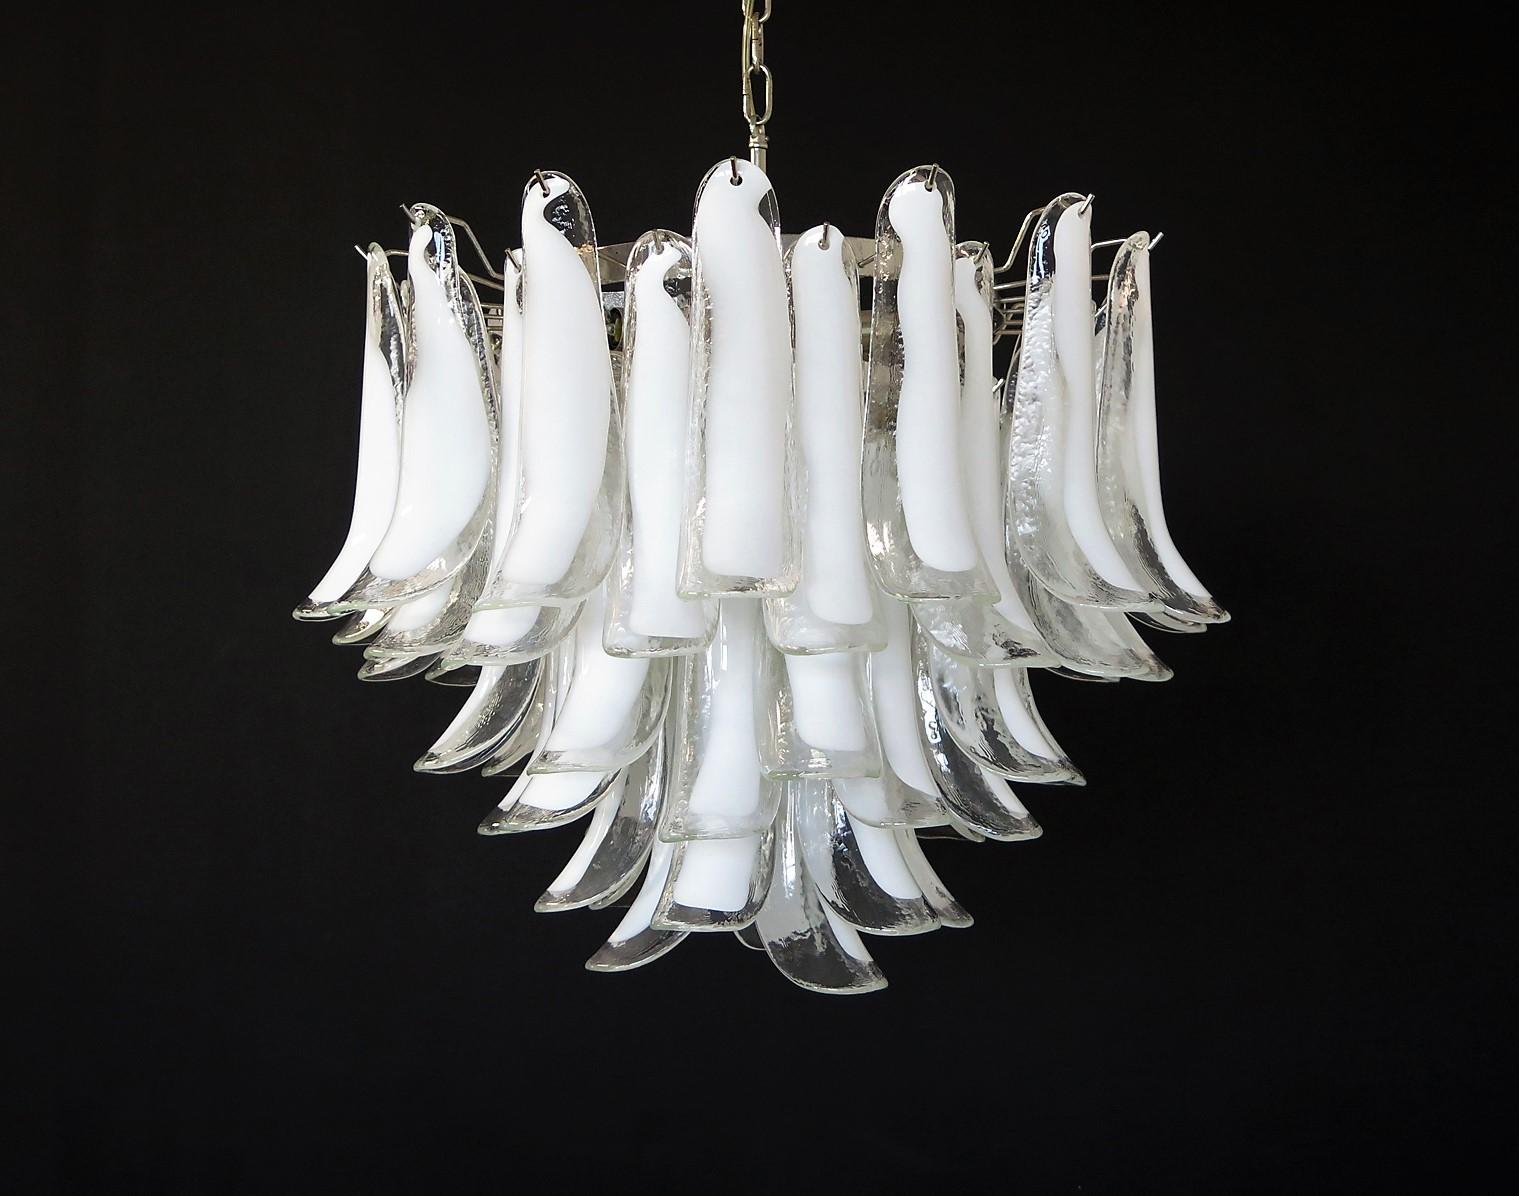 Murano Italian glass chandelier. Fantastic chandelier with trasparent and white “lattimo” glasses, nickel-plated metal frame. It has 53 big monumental petals glass. The glasses are very high quality, the photos do not do the beauty, luster of these